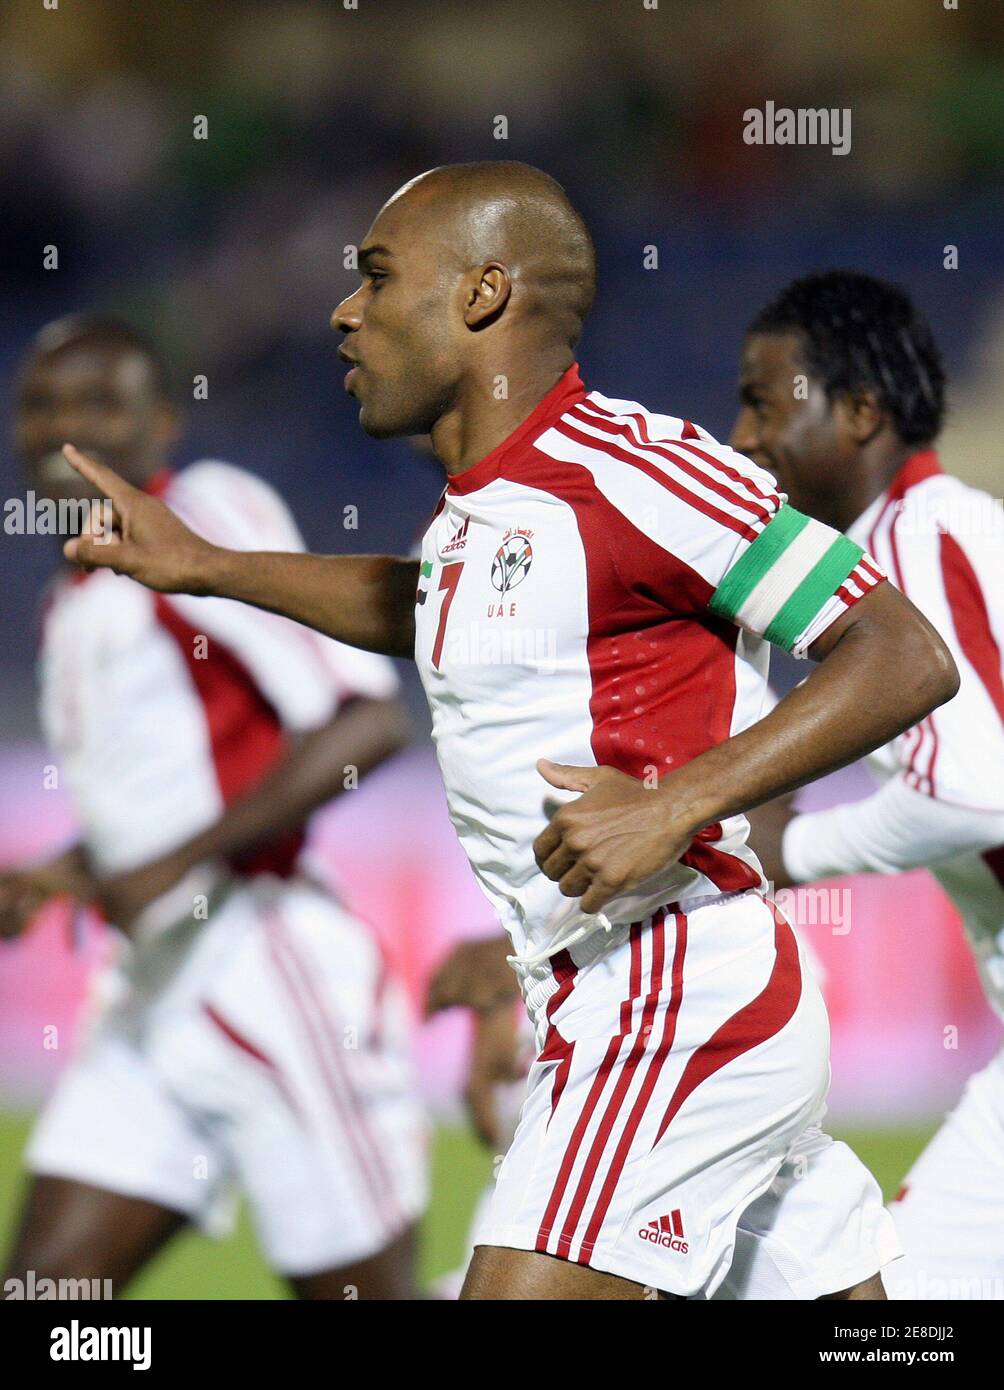 UAE's Mohammed Omar celebrates after scoring first goal against Yemen  during their Gulf Cup soccer match in Muscat January 5, 2009. REUTERS/Fadi  Al-Assaad (OMAN Stock Photo - Alamy